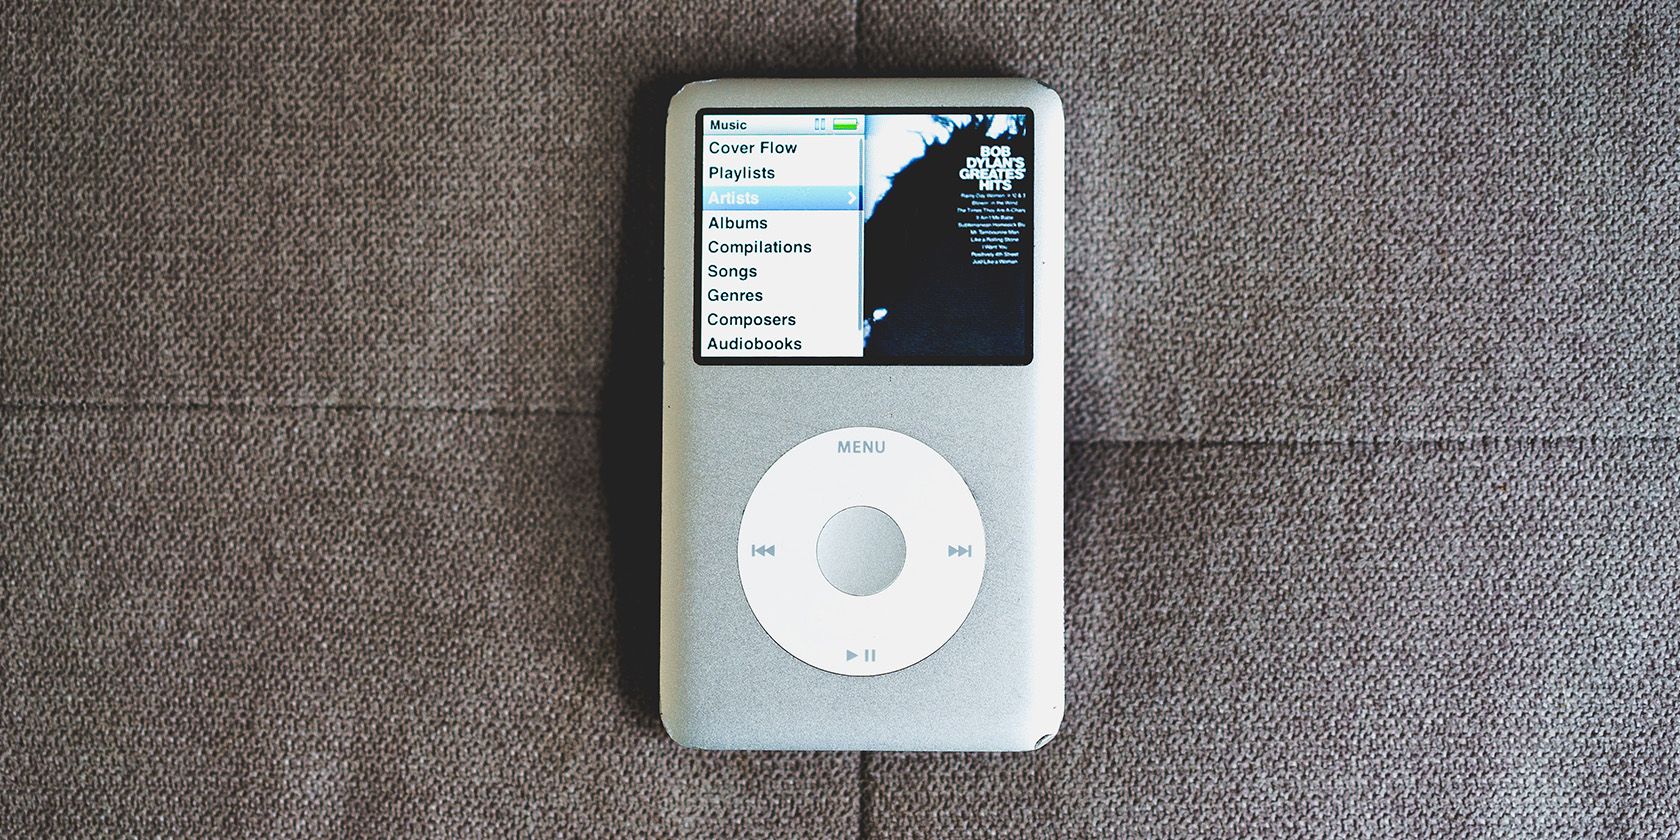 The iPod Is Dead: Here Are 3 Reasons Why Apple Is Making a Big Mistake